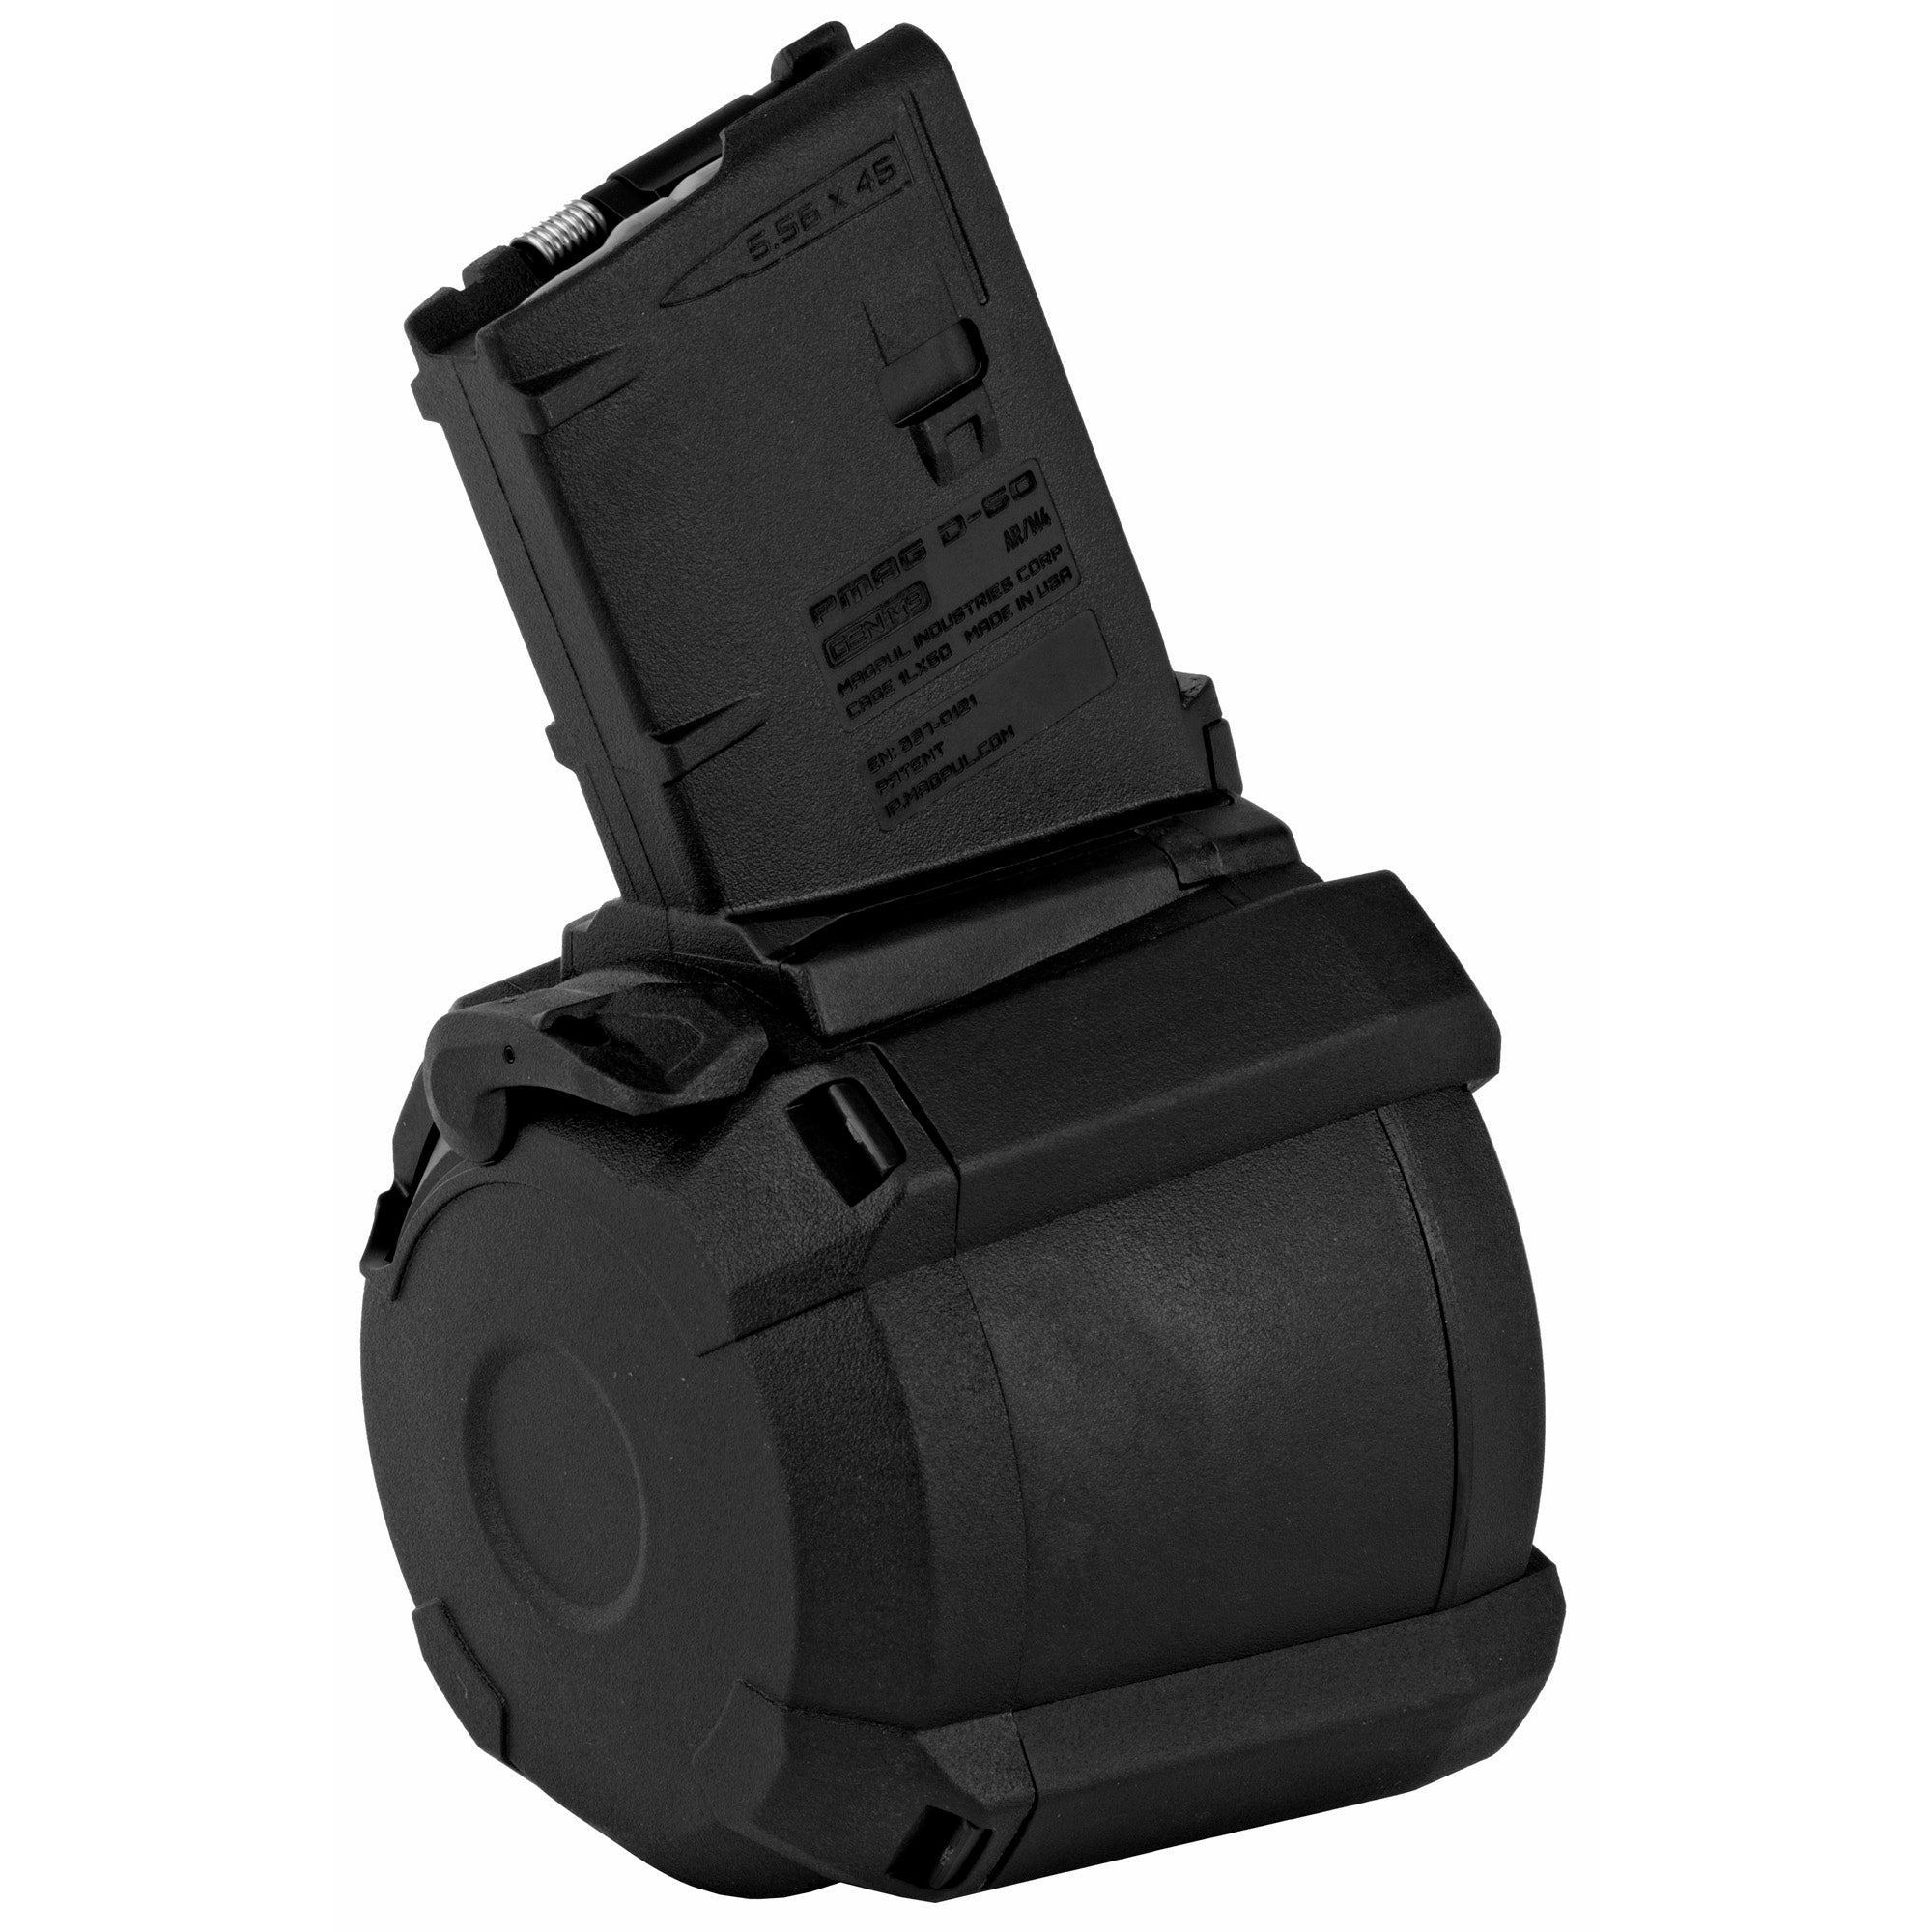 Magpul PMAG D-60 Drum Magazine for AR-15/M4, 60-round capacity in black, featuring durable polymer construction and a visible round-count window.